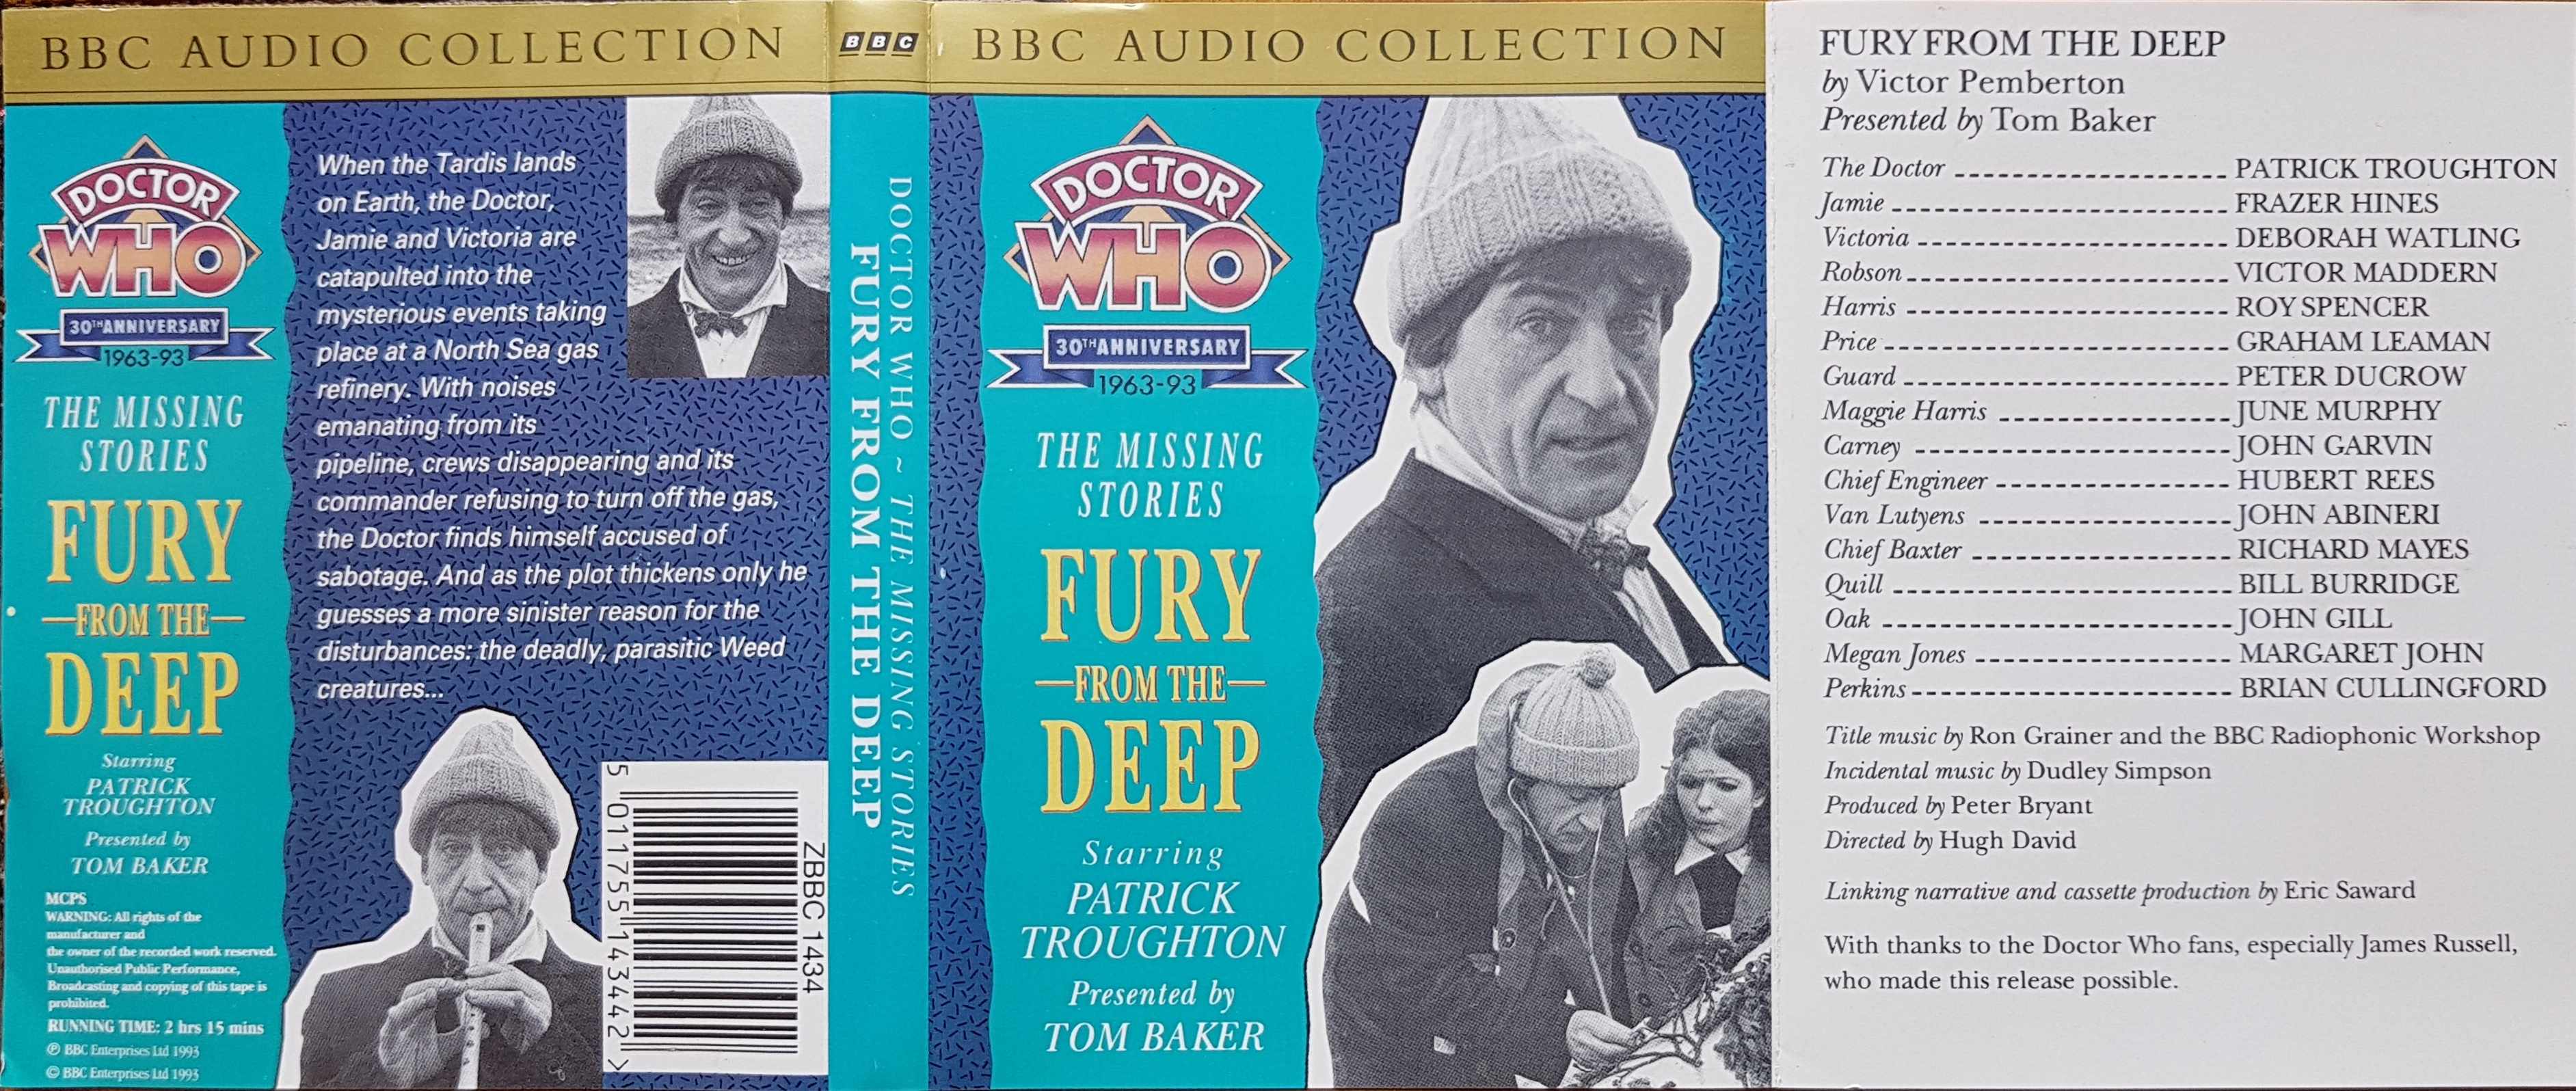 Picture of ZBBC 1434 Doctor Who - Fury from the deep by artist Victor Pemberton from the BBC records and Tapes library